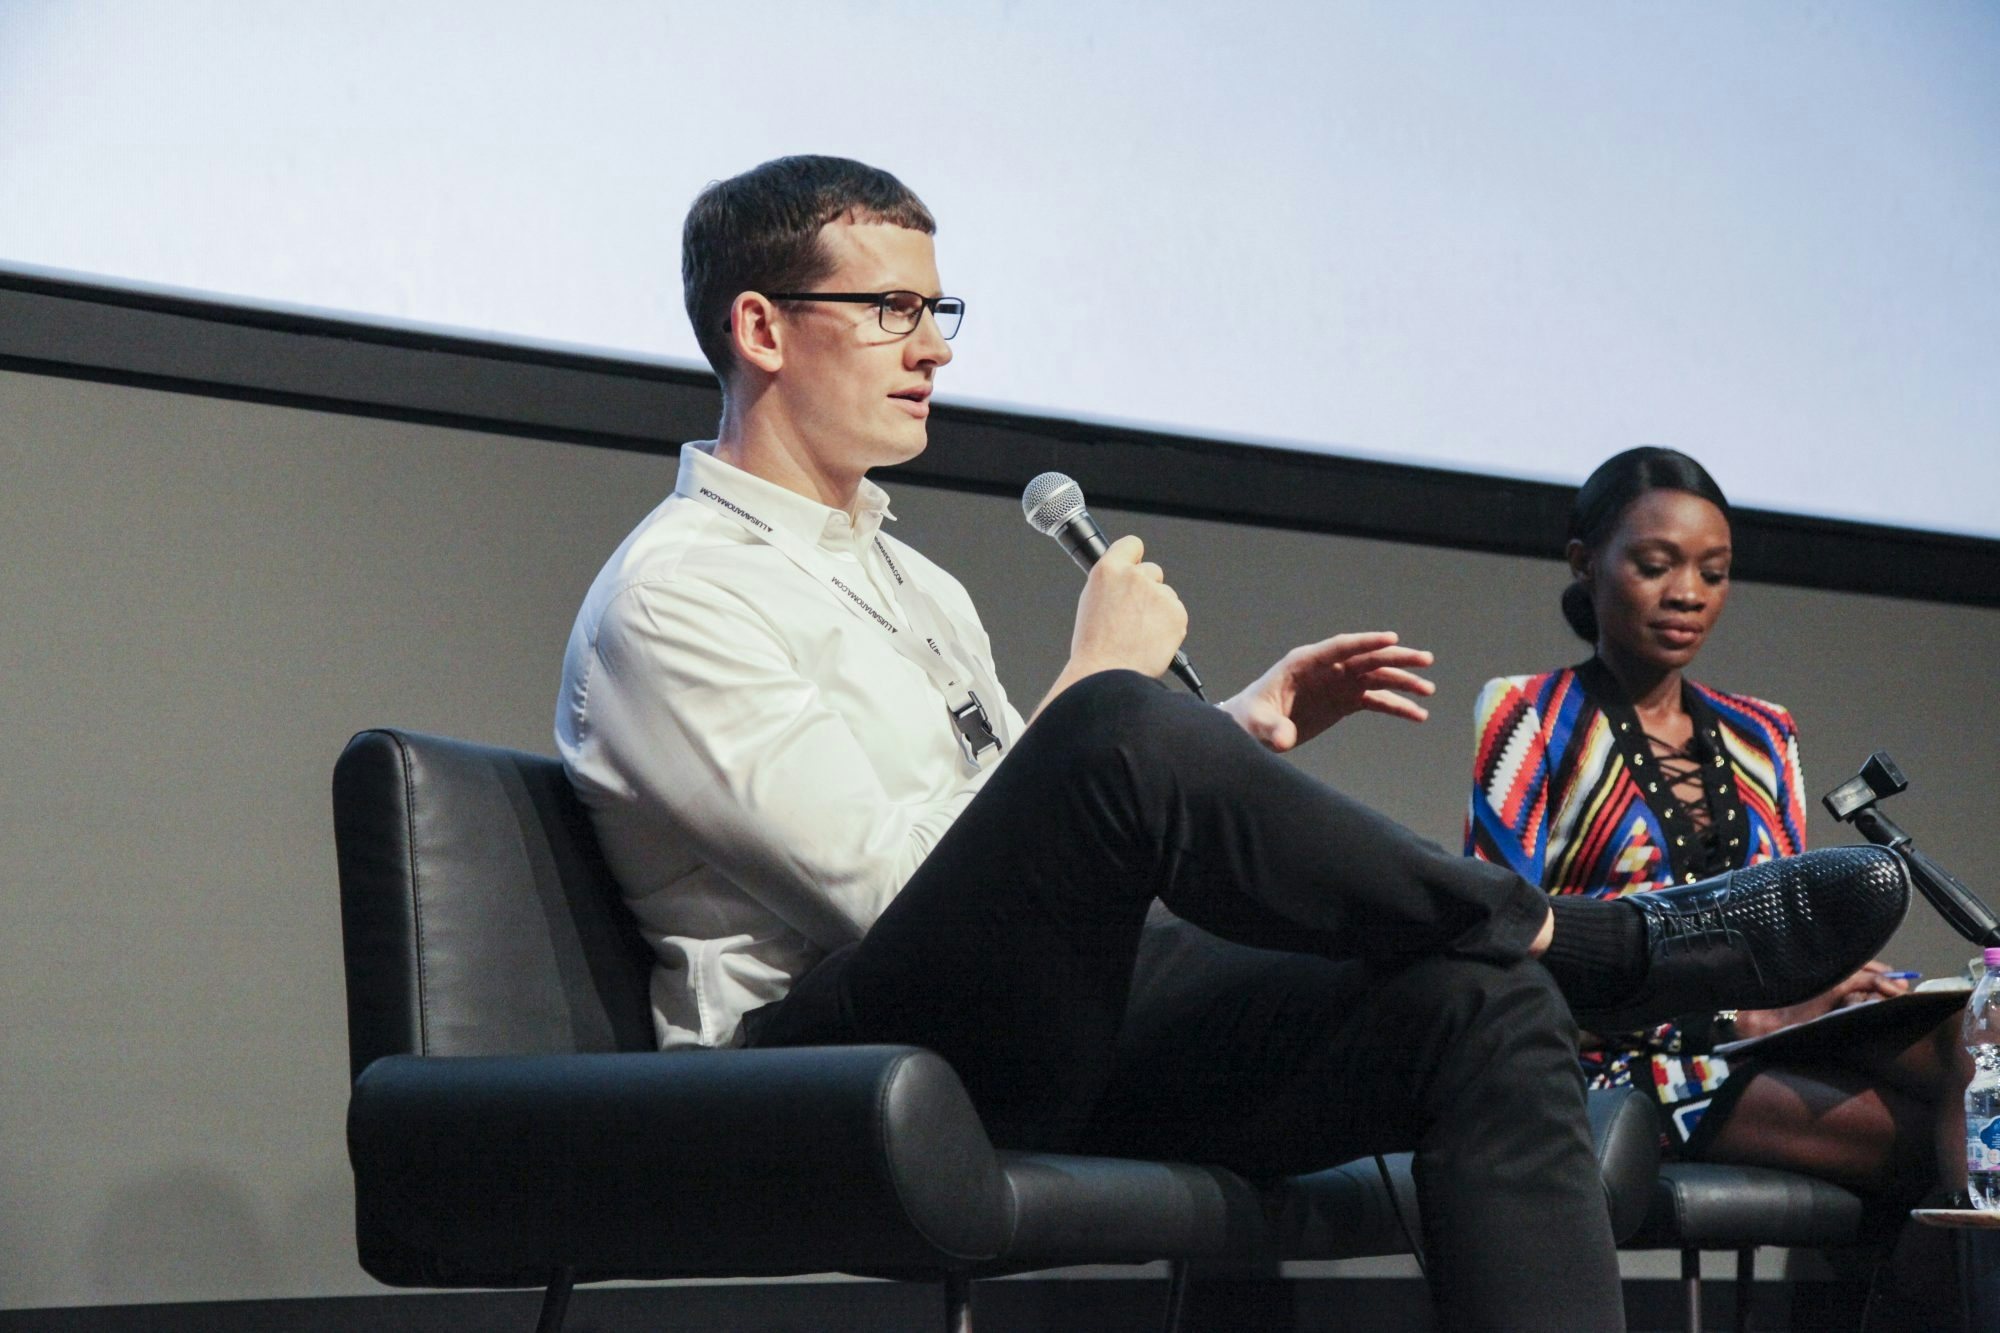 Hannes Ben, Chief International Officer at Forward3D, shares the complexities of cross-border advertising in China at LUISAVIAROMA 3rd Fashion & Technology Summit alongside Sissi Johnson. (Courtesy Photo) 